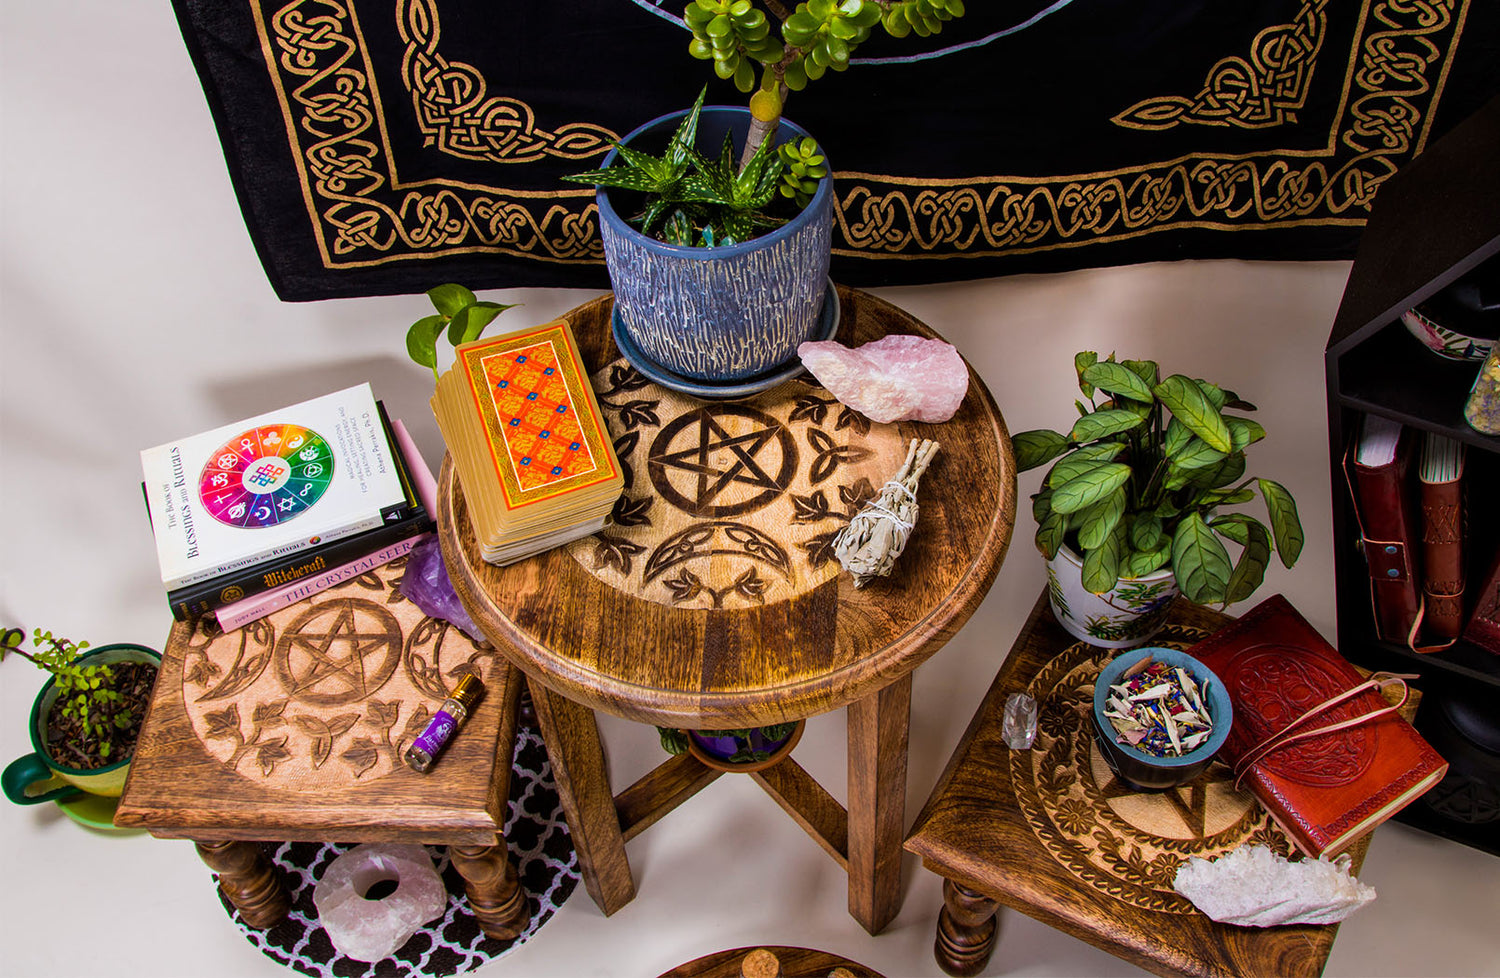 Setting up your altar